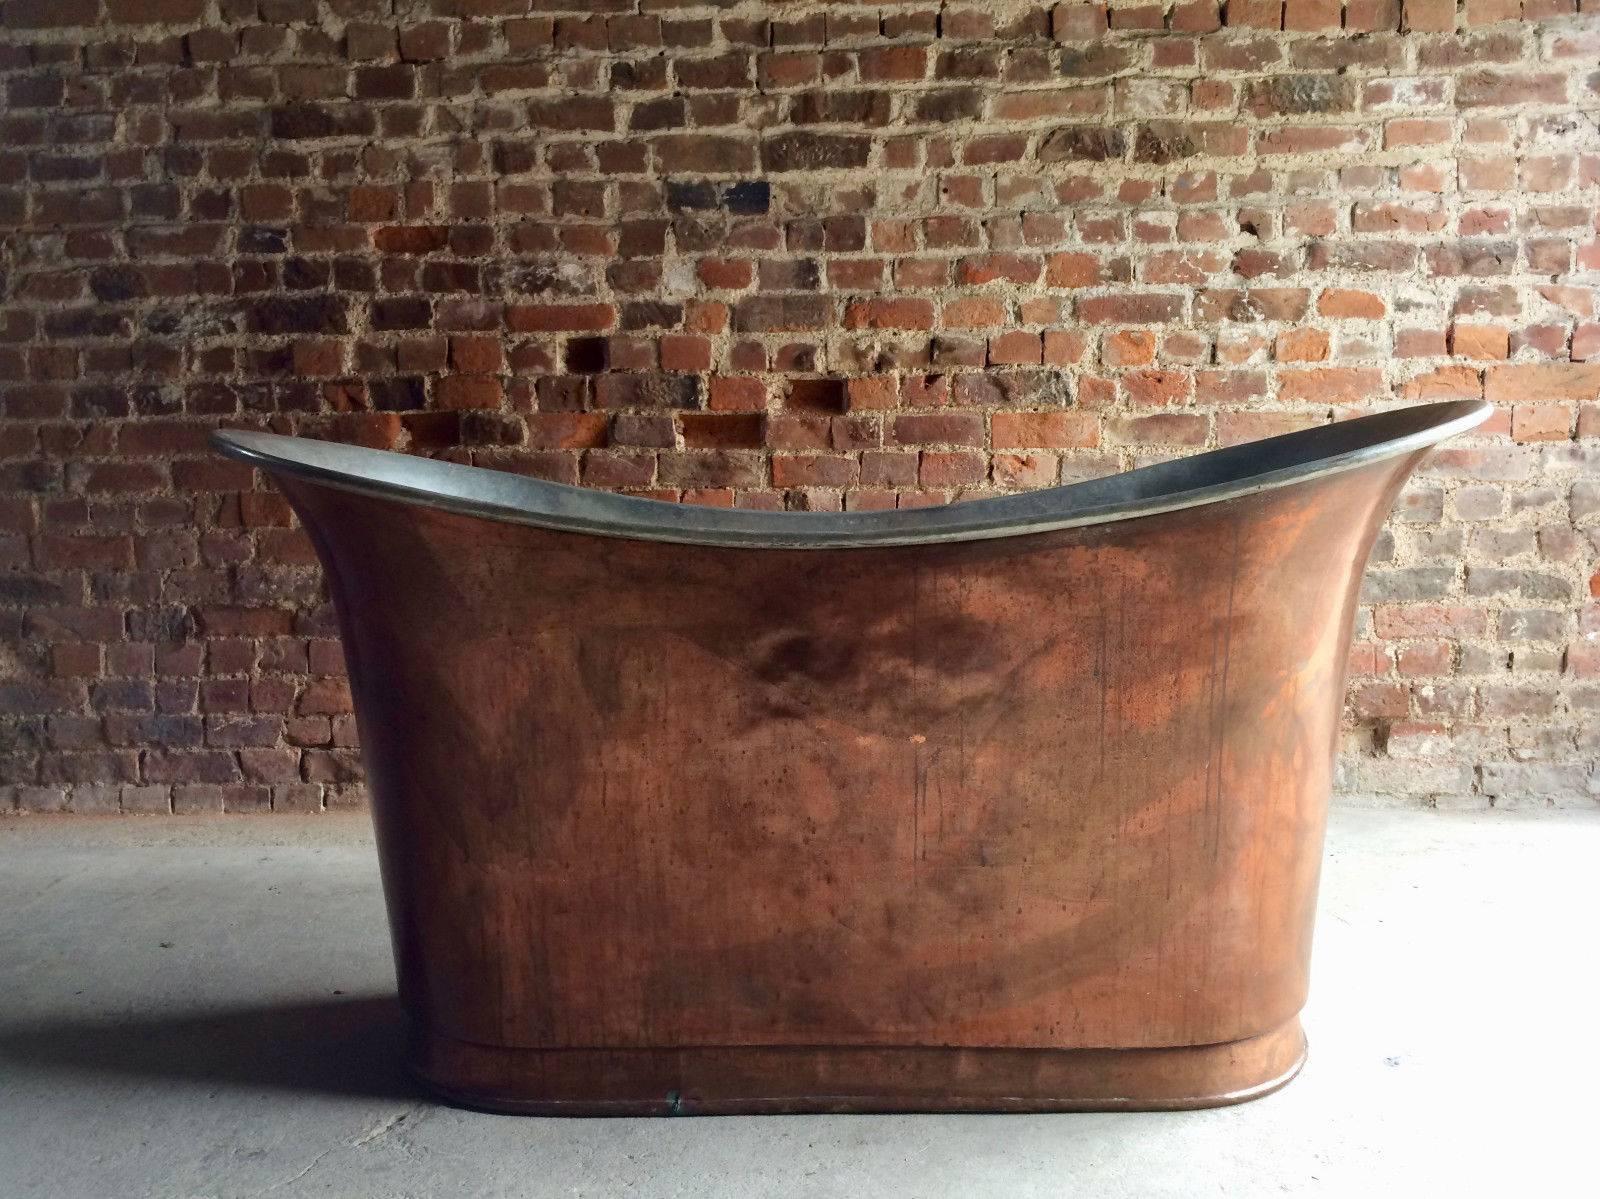 A stunningly beautiful antique French freestanding copper bath with tin lined interior, dating from early 20th century, wonderful aged patination to the copper giving lots of character, looks truly amazing!